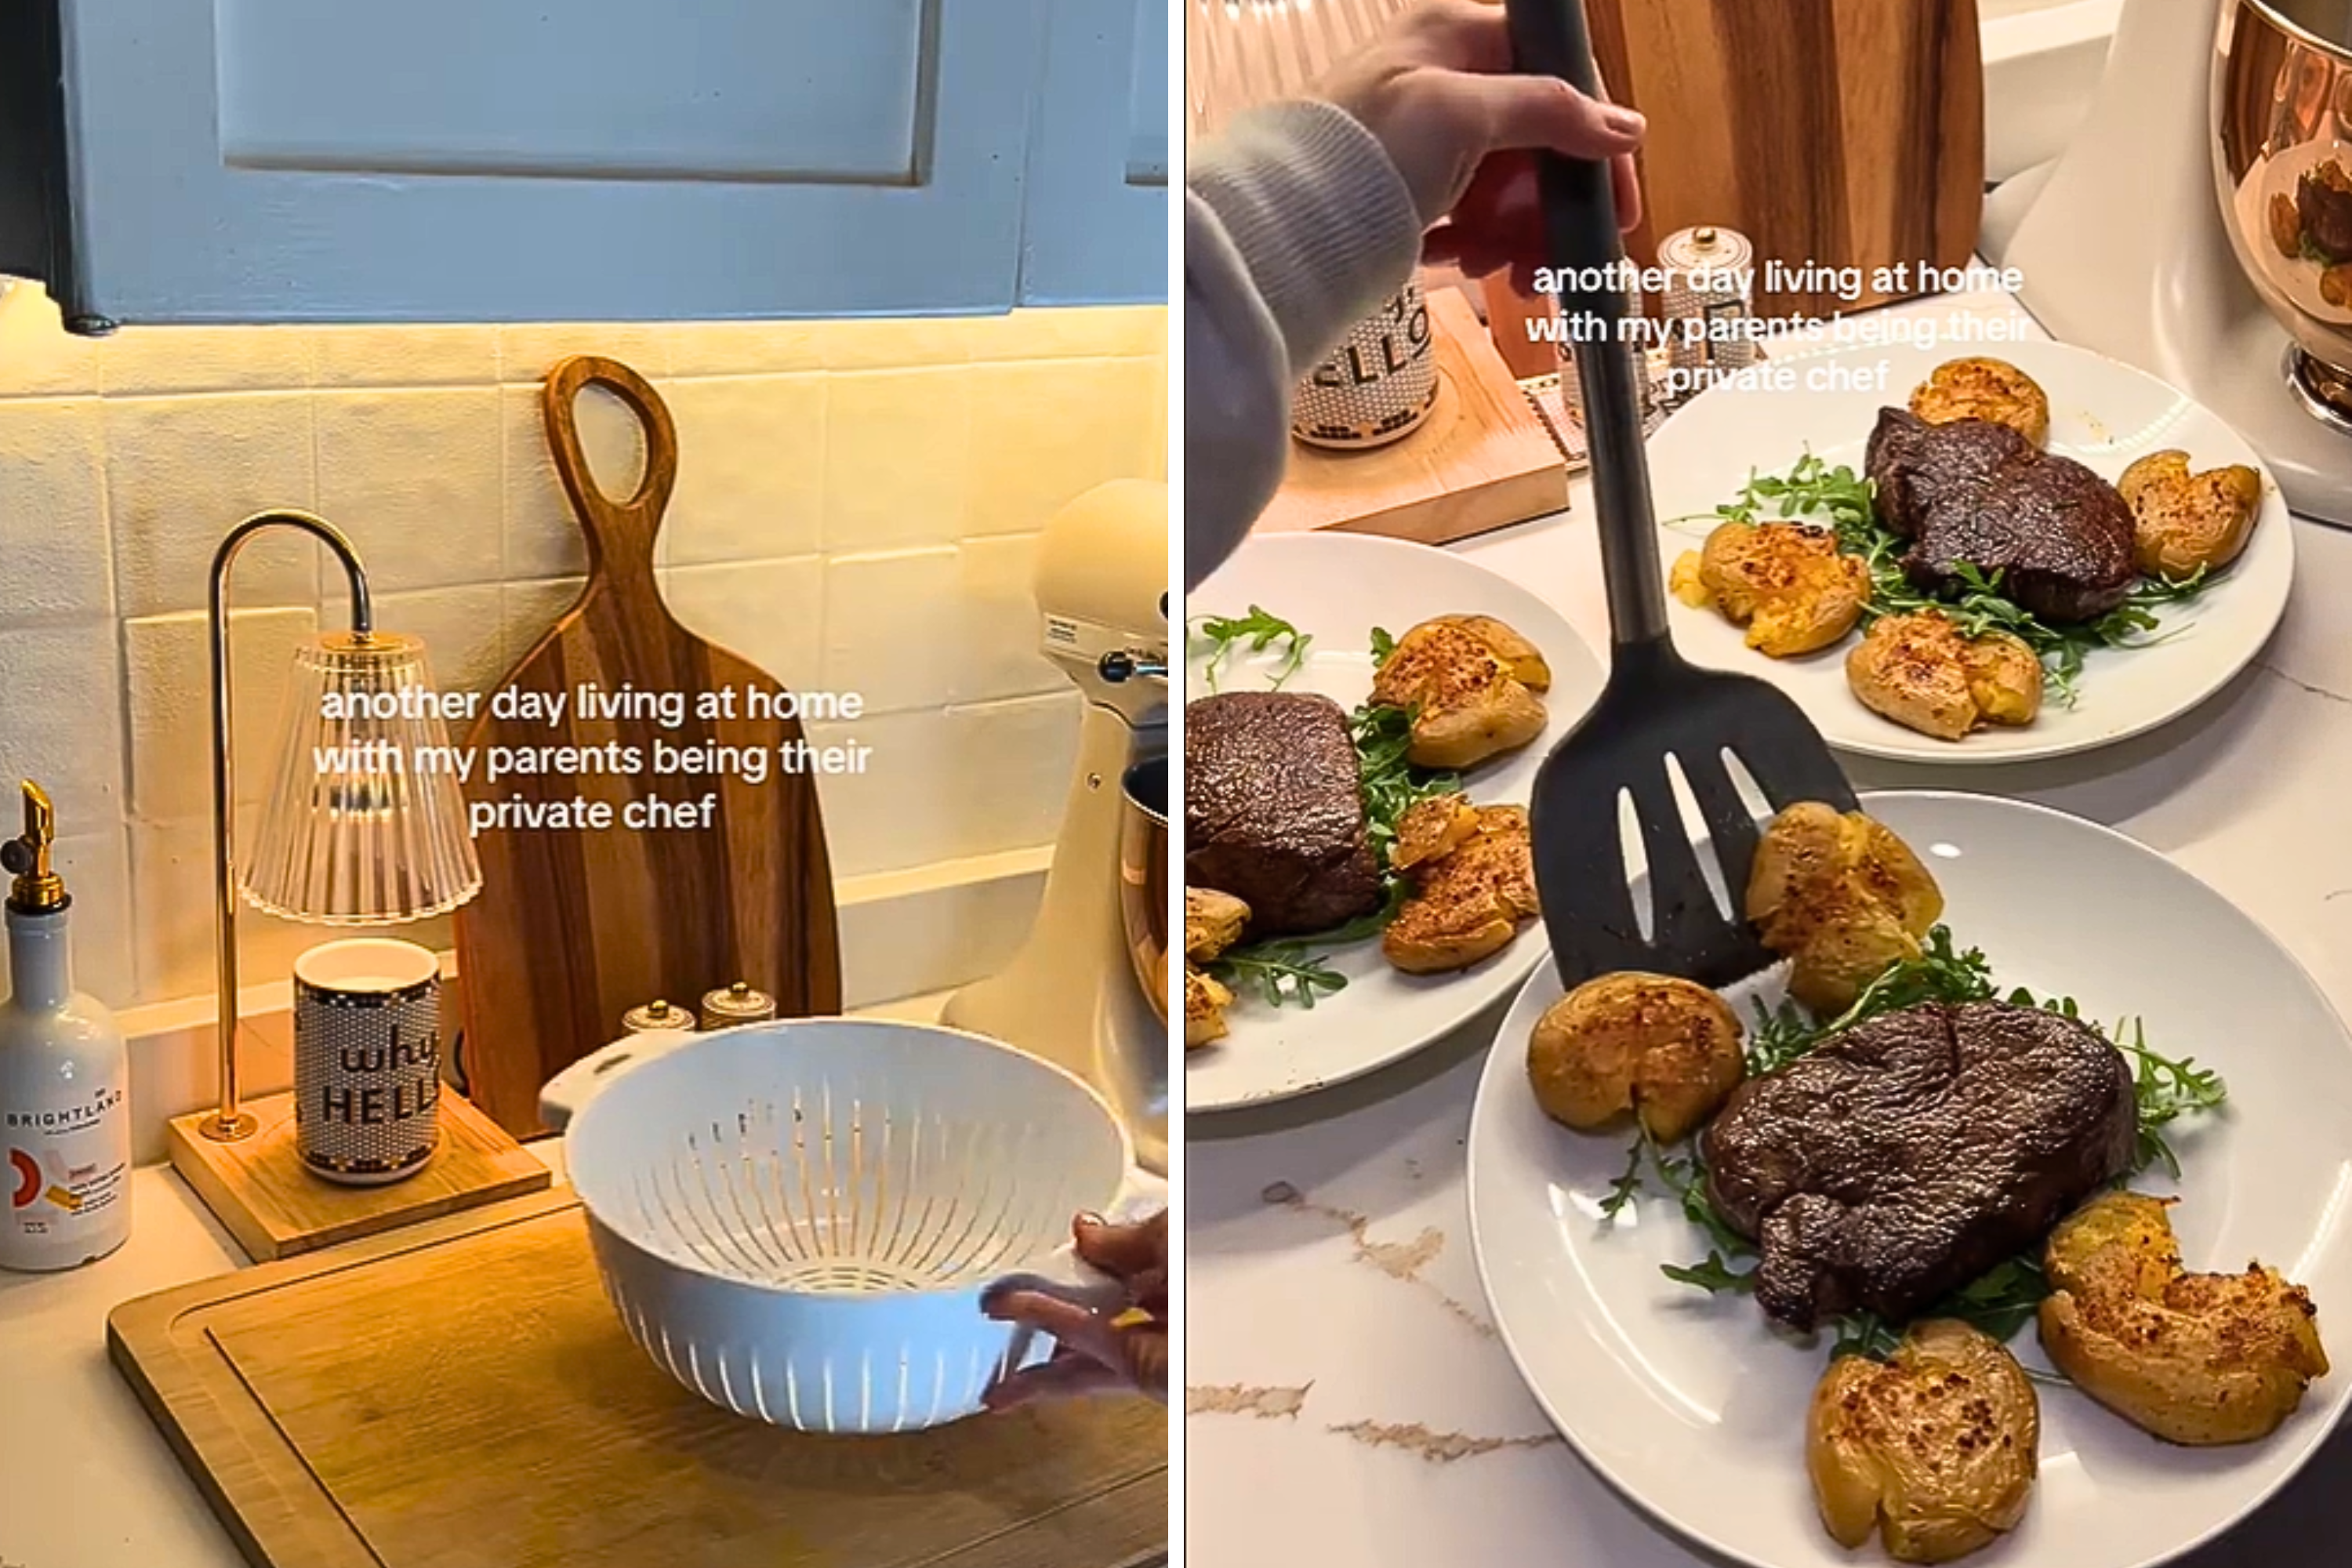 Gen Z woman shares dishes she makes as “private chef” for delighted parents